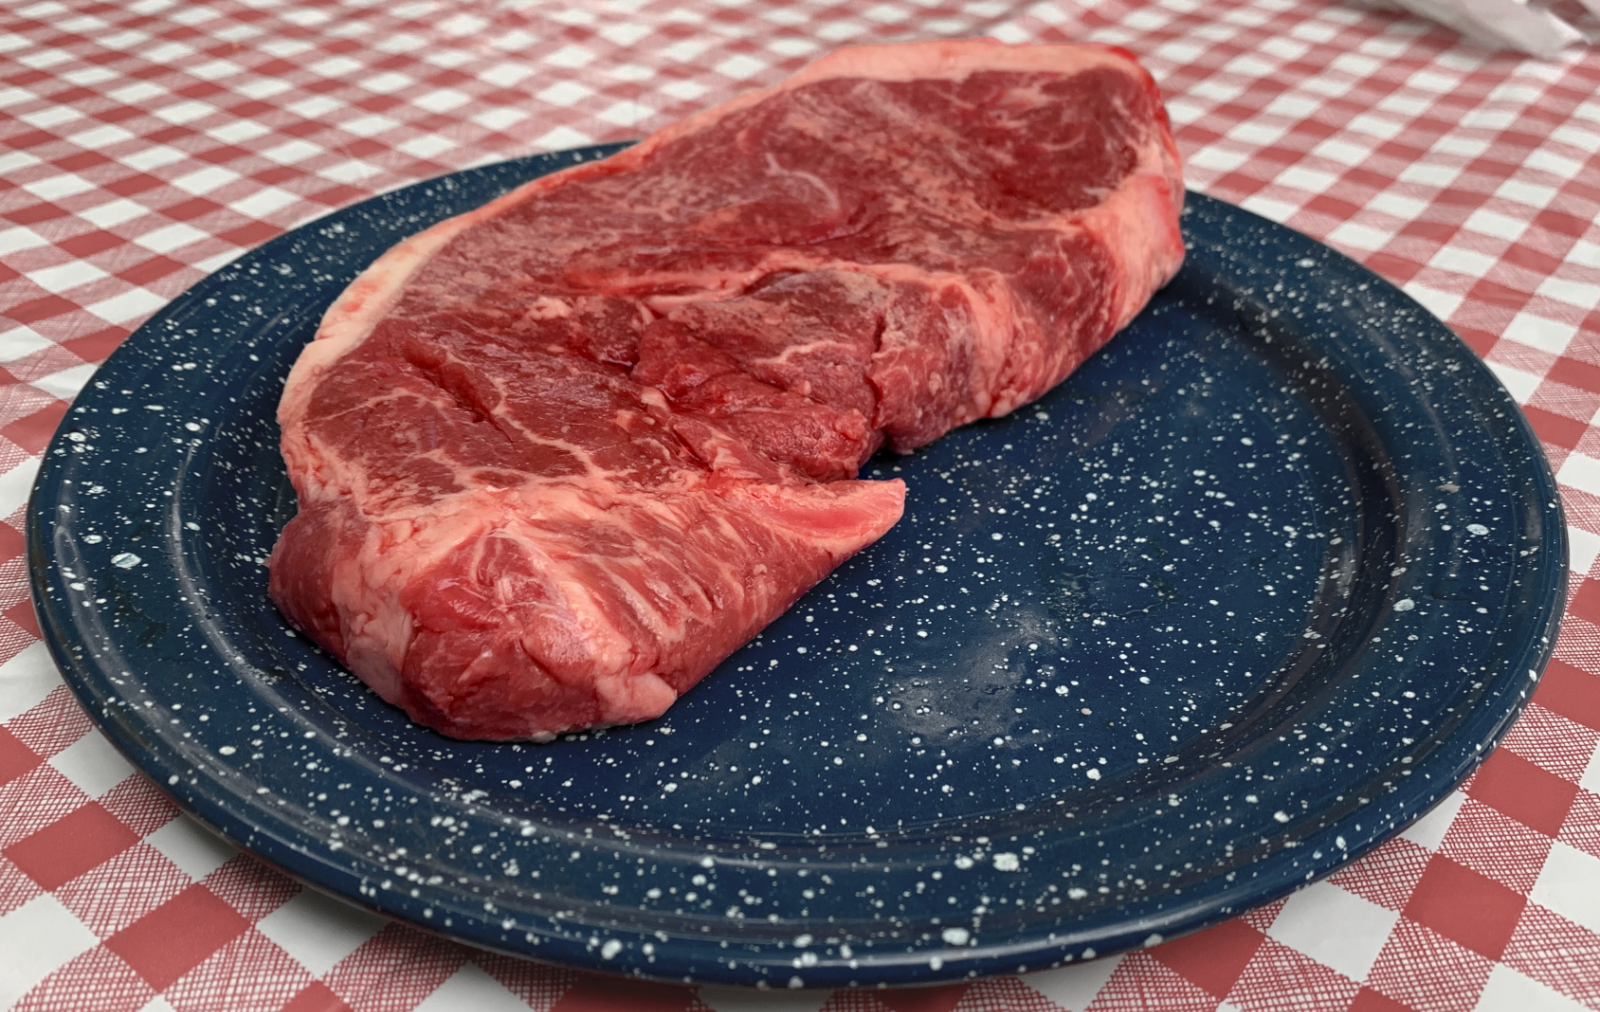 dry-aged-charolais-sirloin-strip-steak-average-weight-of-15-pounds-flash-frozen-humanely-and-sustainably-raised-all-natural-keto-primal-paleo-atkins-sugar-free-antibiotic-free-bgh-free